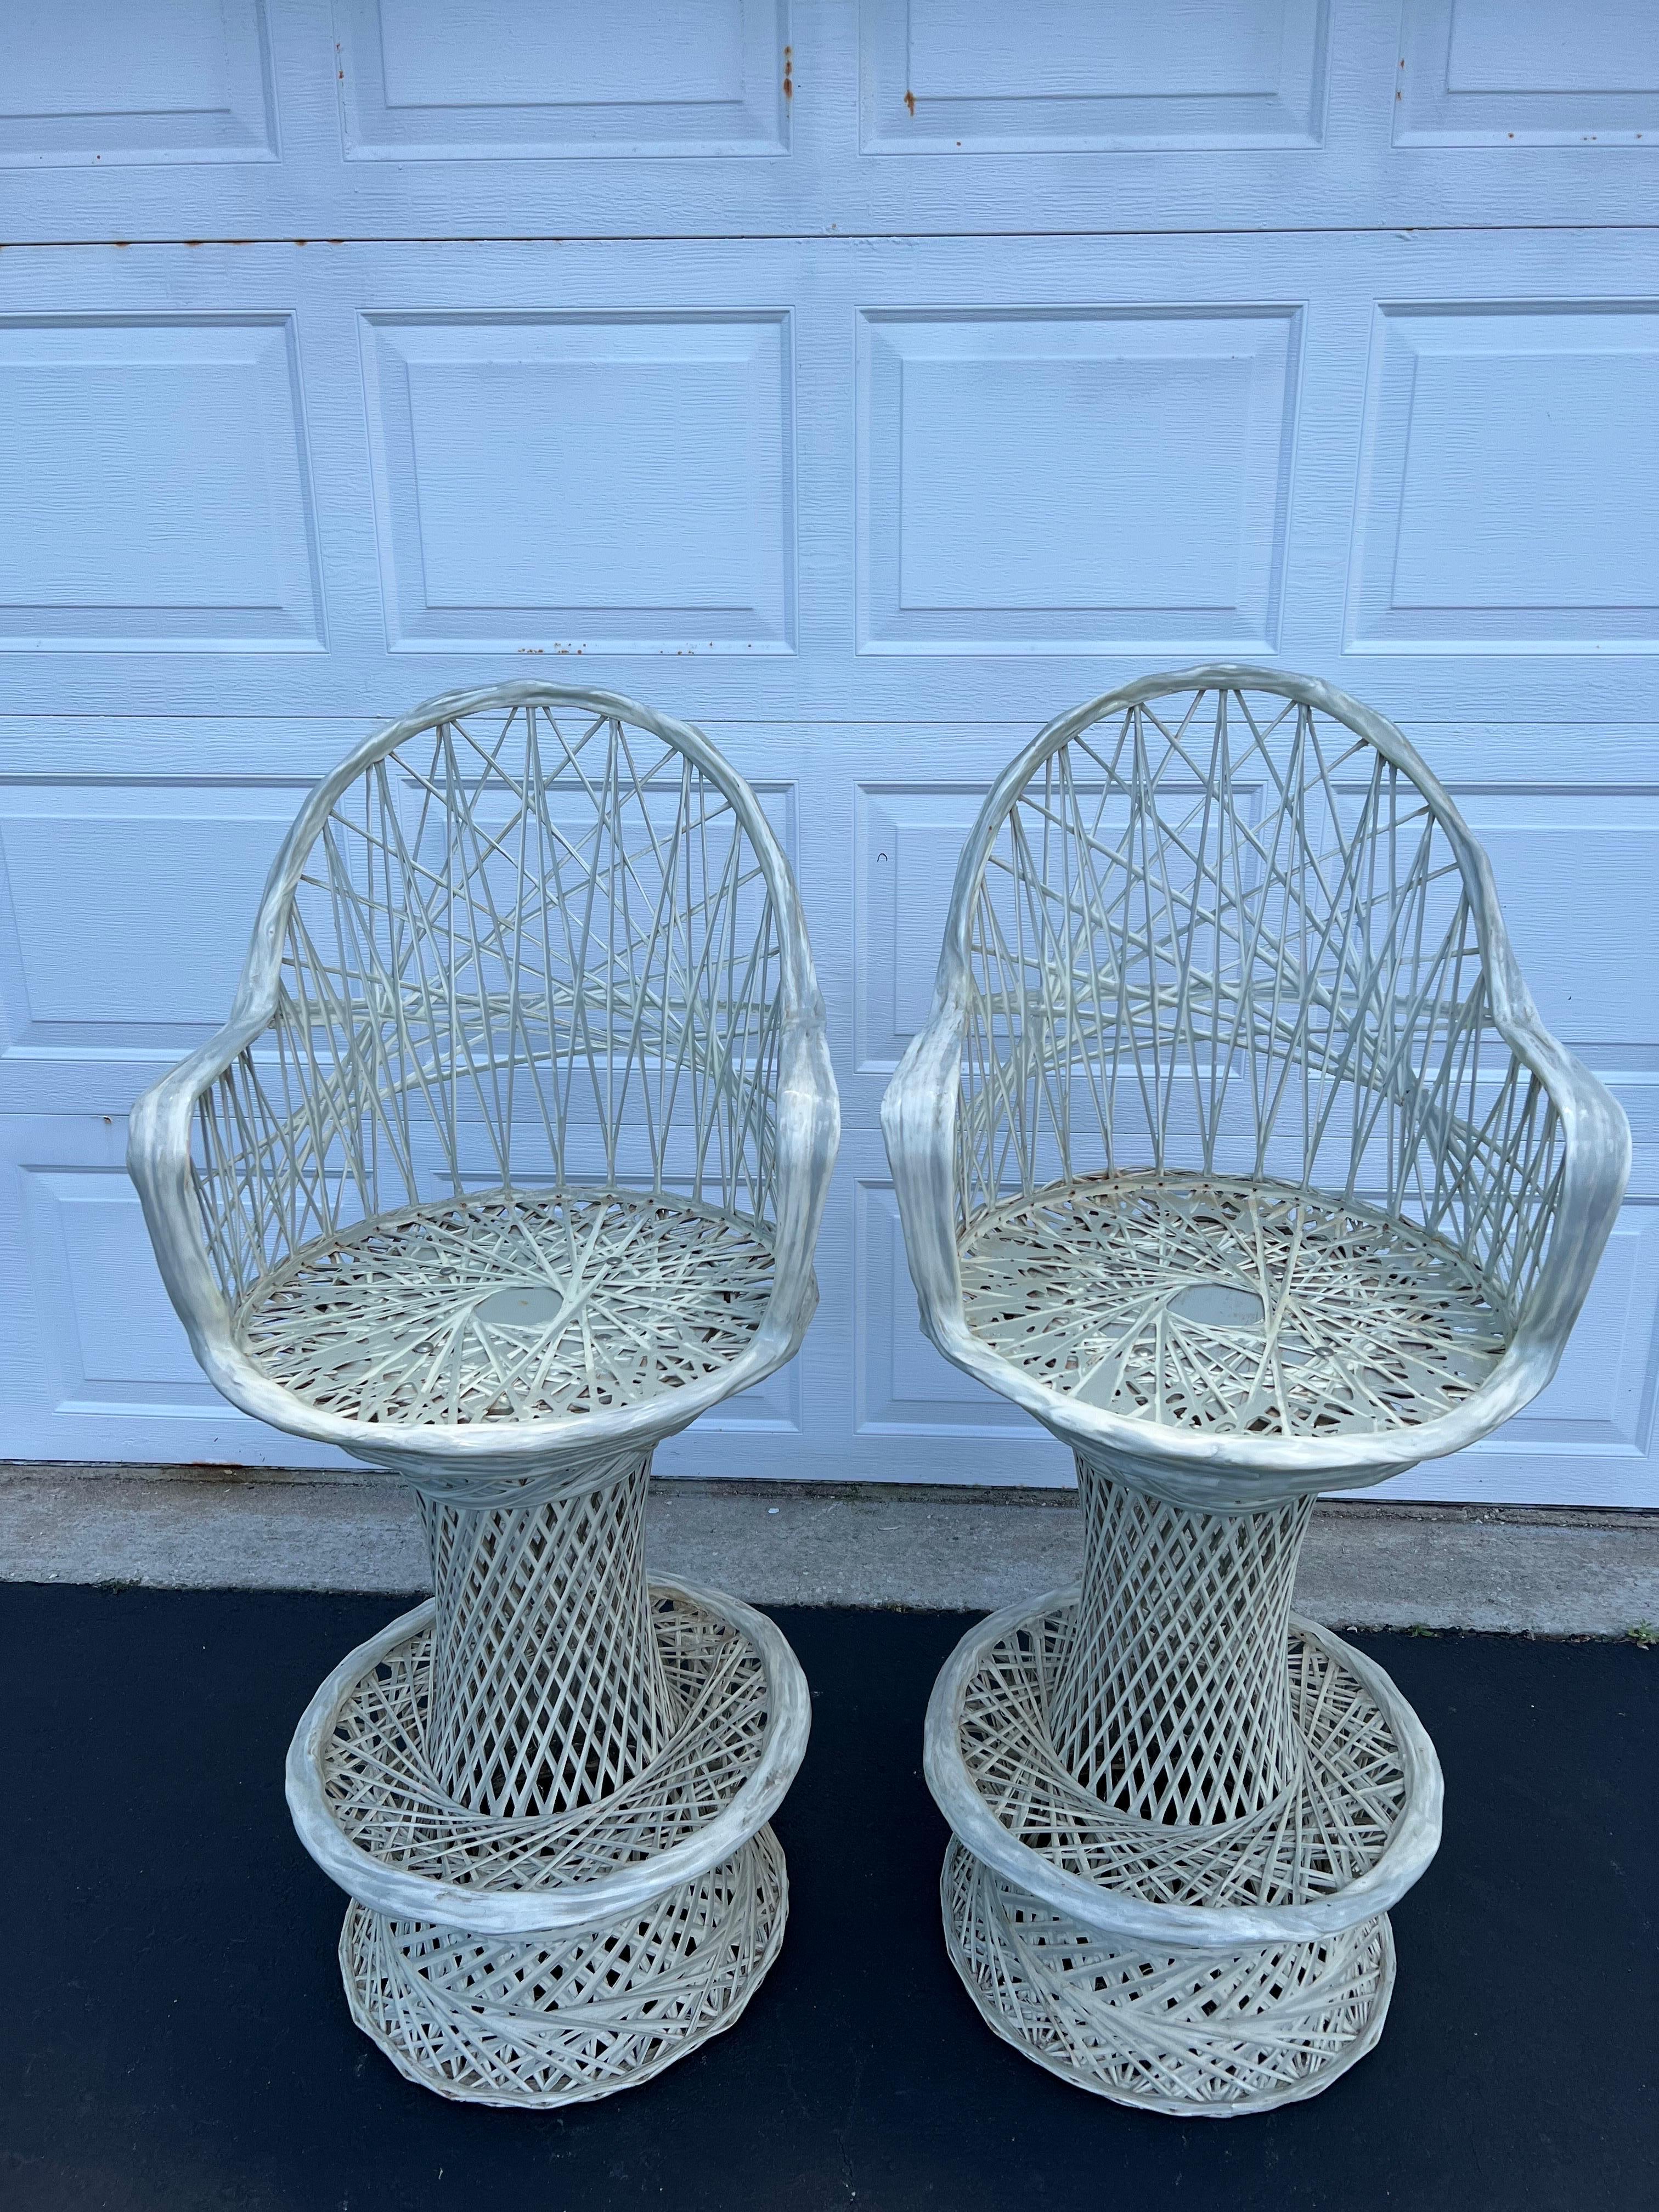 Pair of Mid-Century Modern Spun Fiberglass Bar Stools  In Good Condition For Sale In Redding, CT